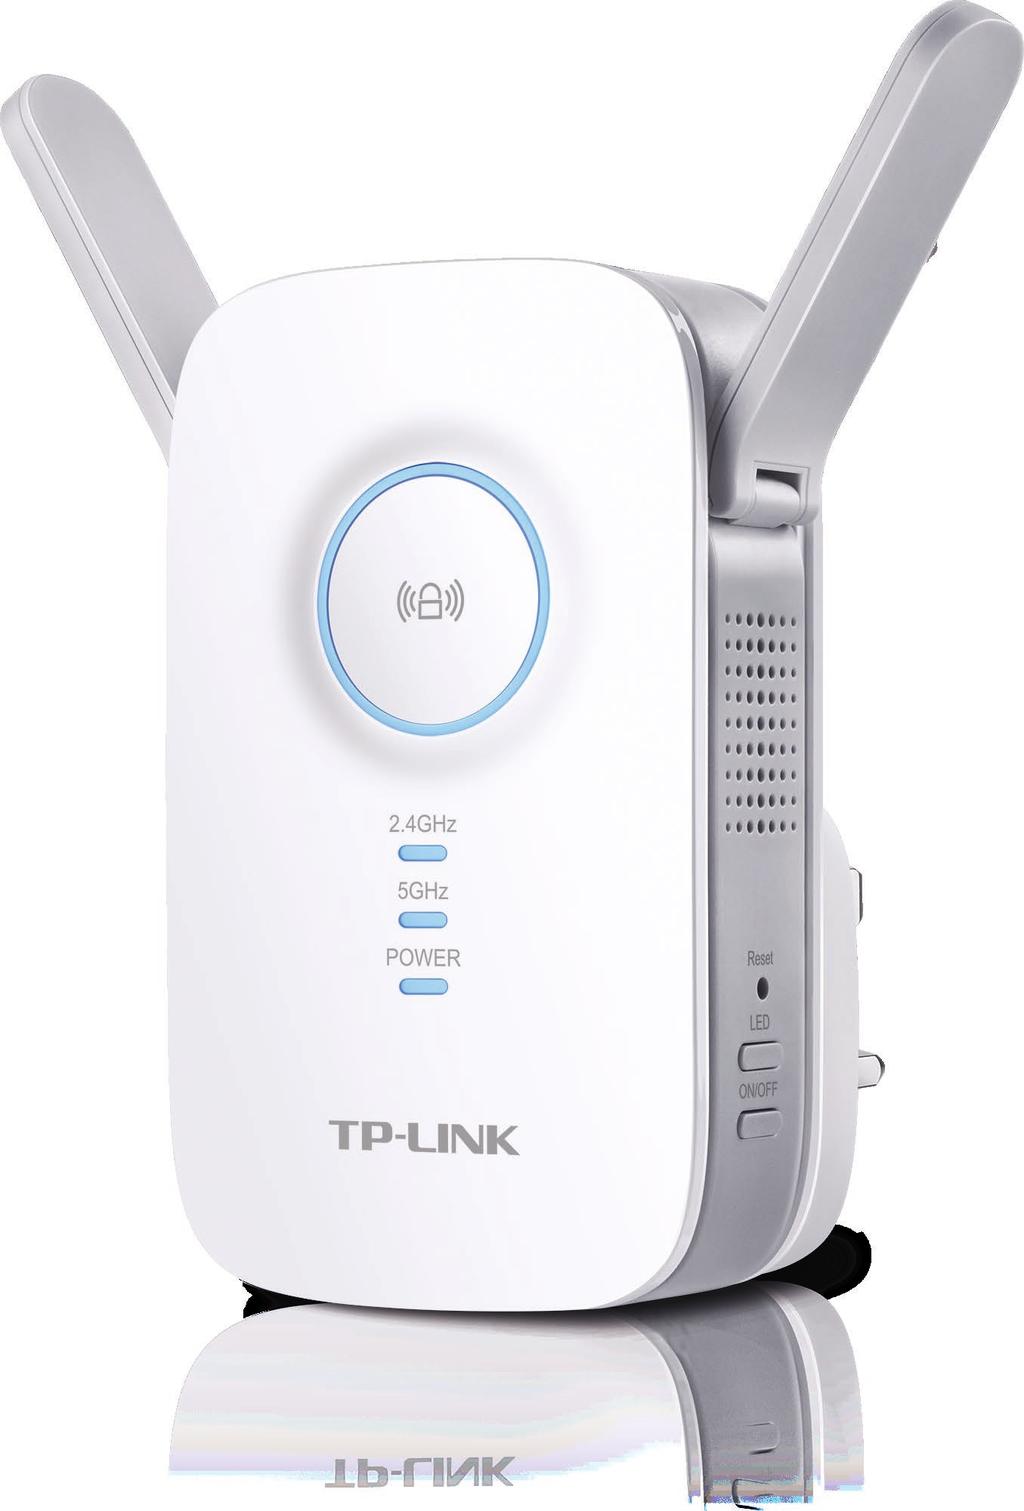 AC 1200 Wi-Fi Range Extender Highlights Superfast Wi-Fi Dual-band wireless expansion (300Mbps on 2.